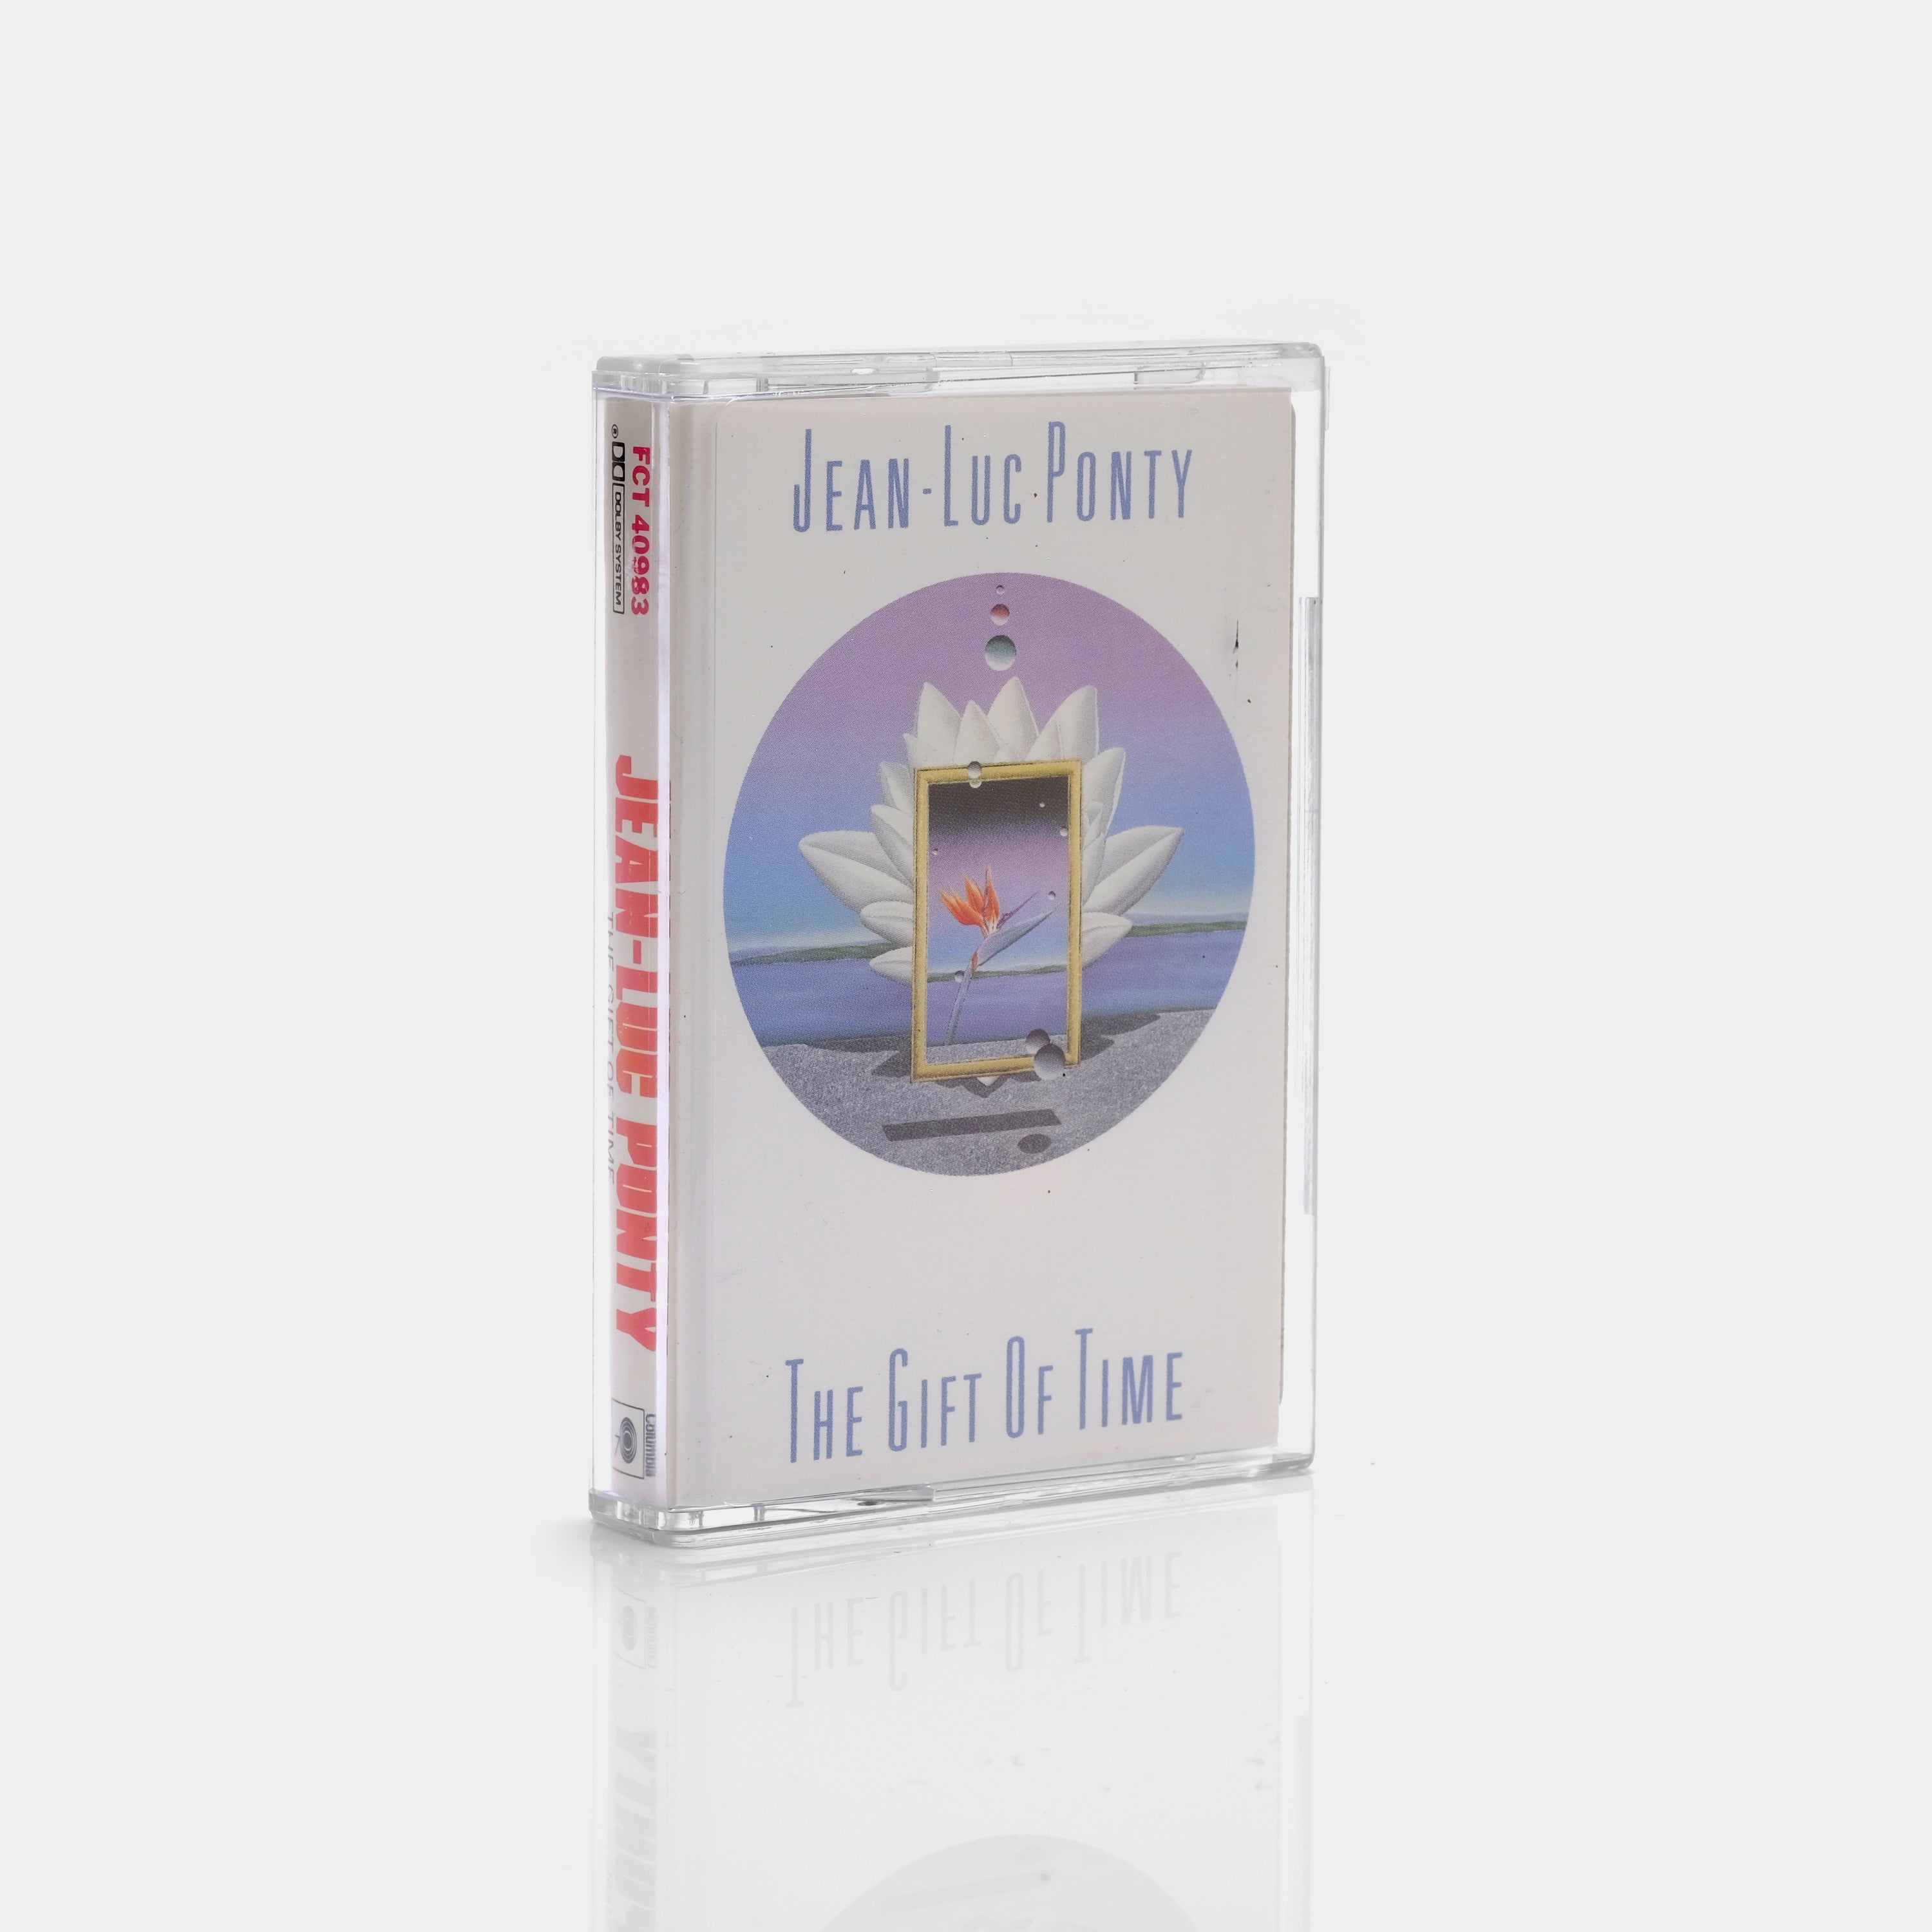 Jean-Luc Ponty - The Gift Of Time Cassette Tape